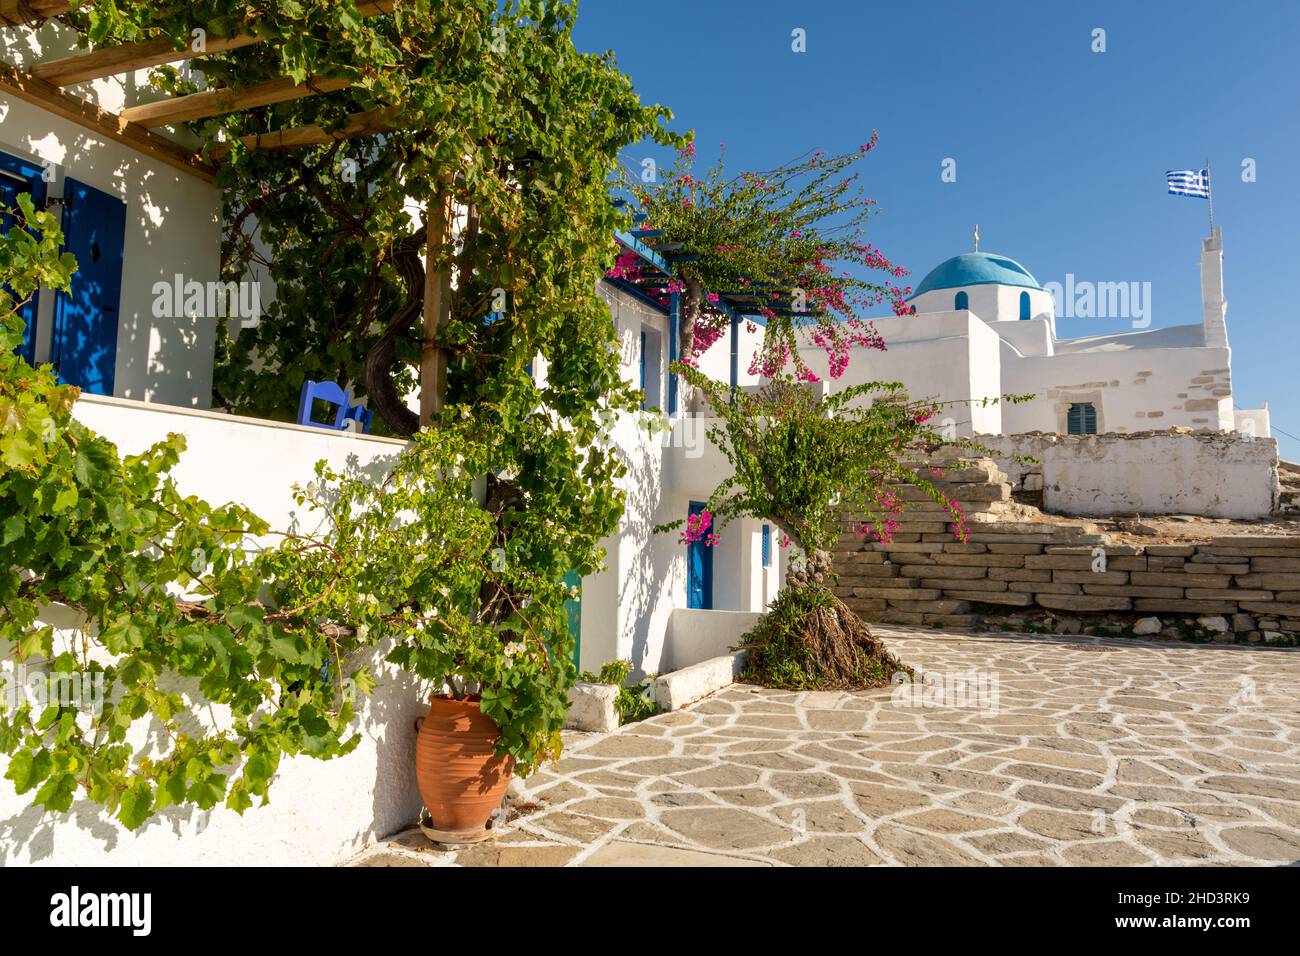 Page 2 - Konstantinos High Resolution Stock Photography and Images - Alamy